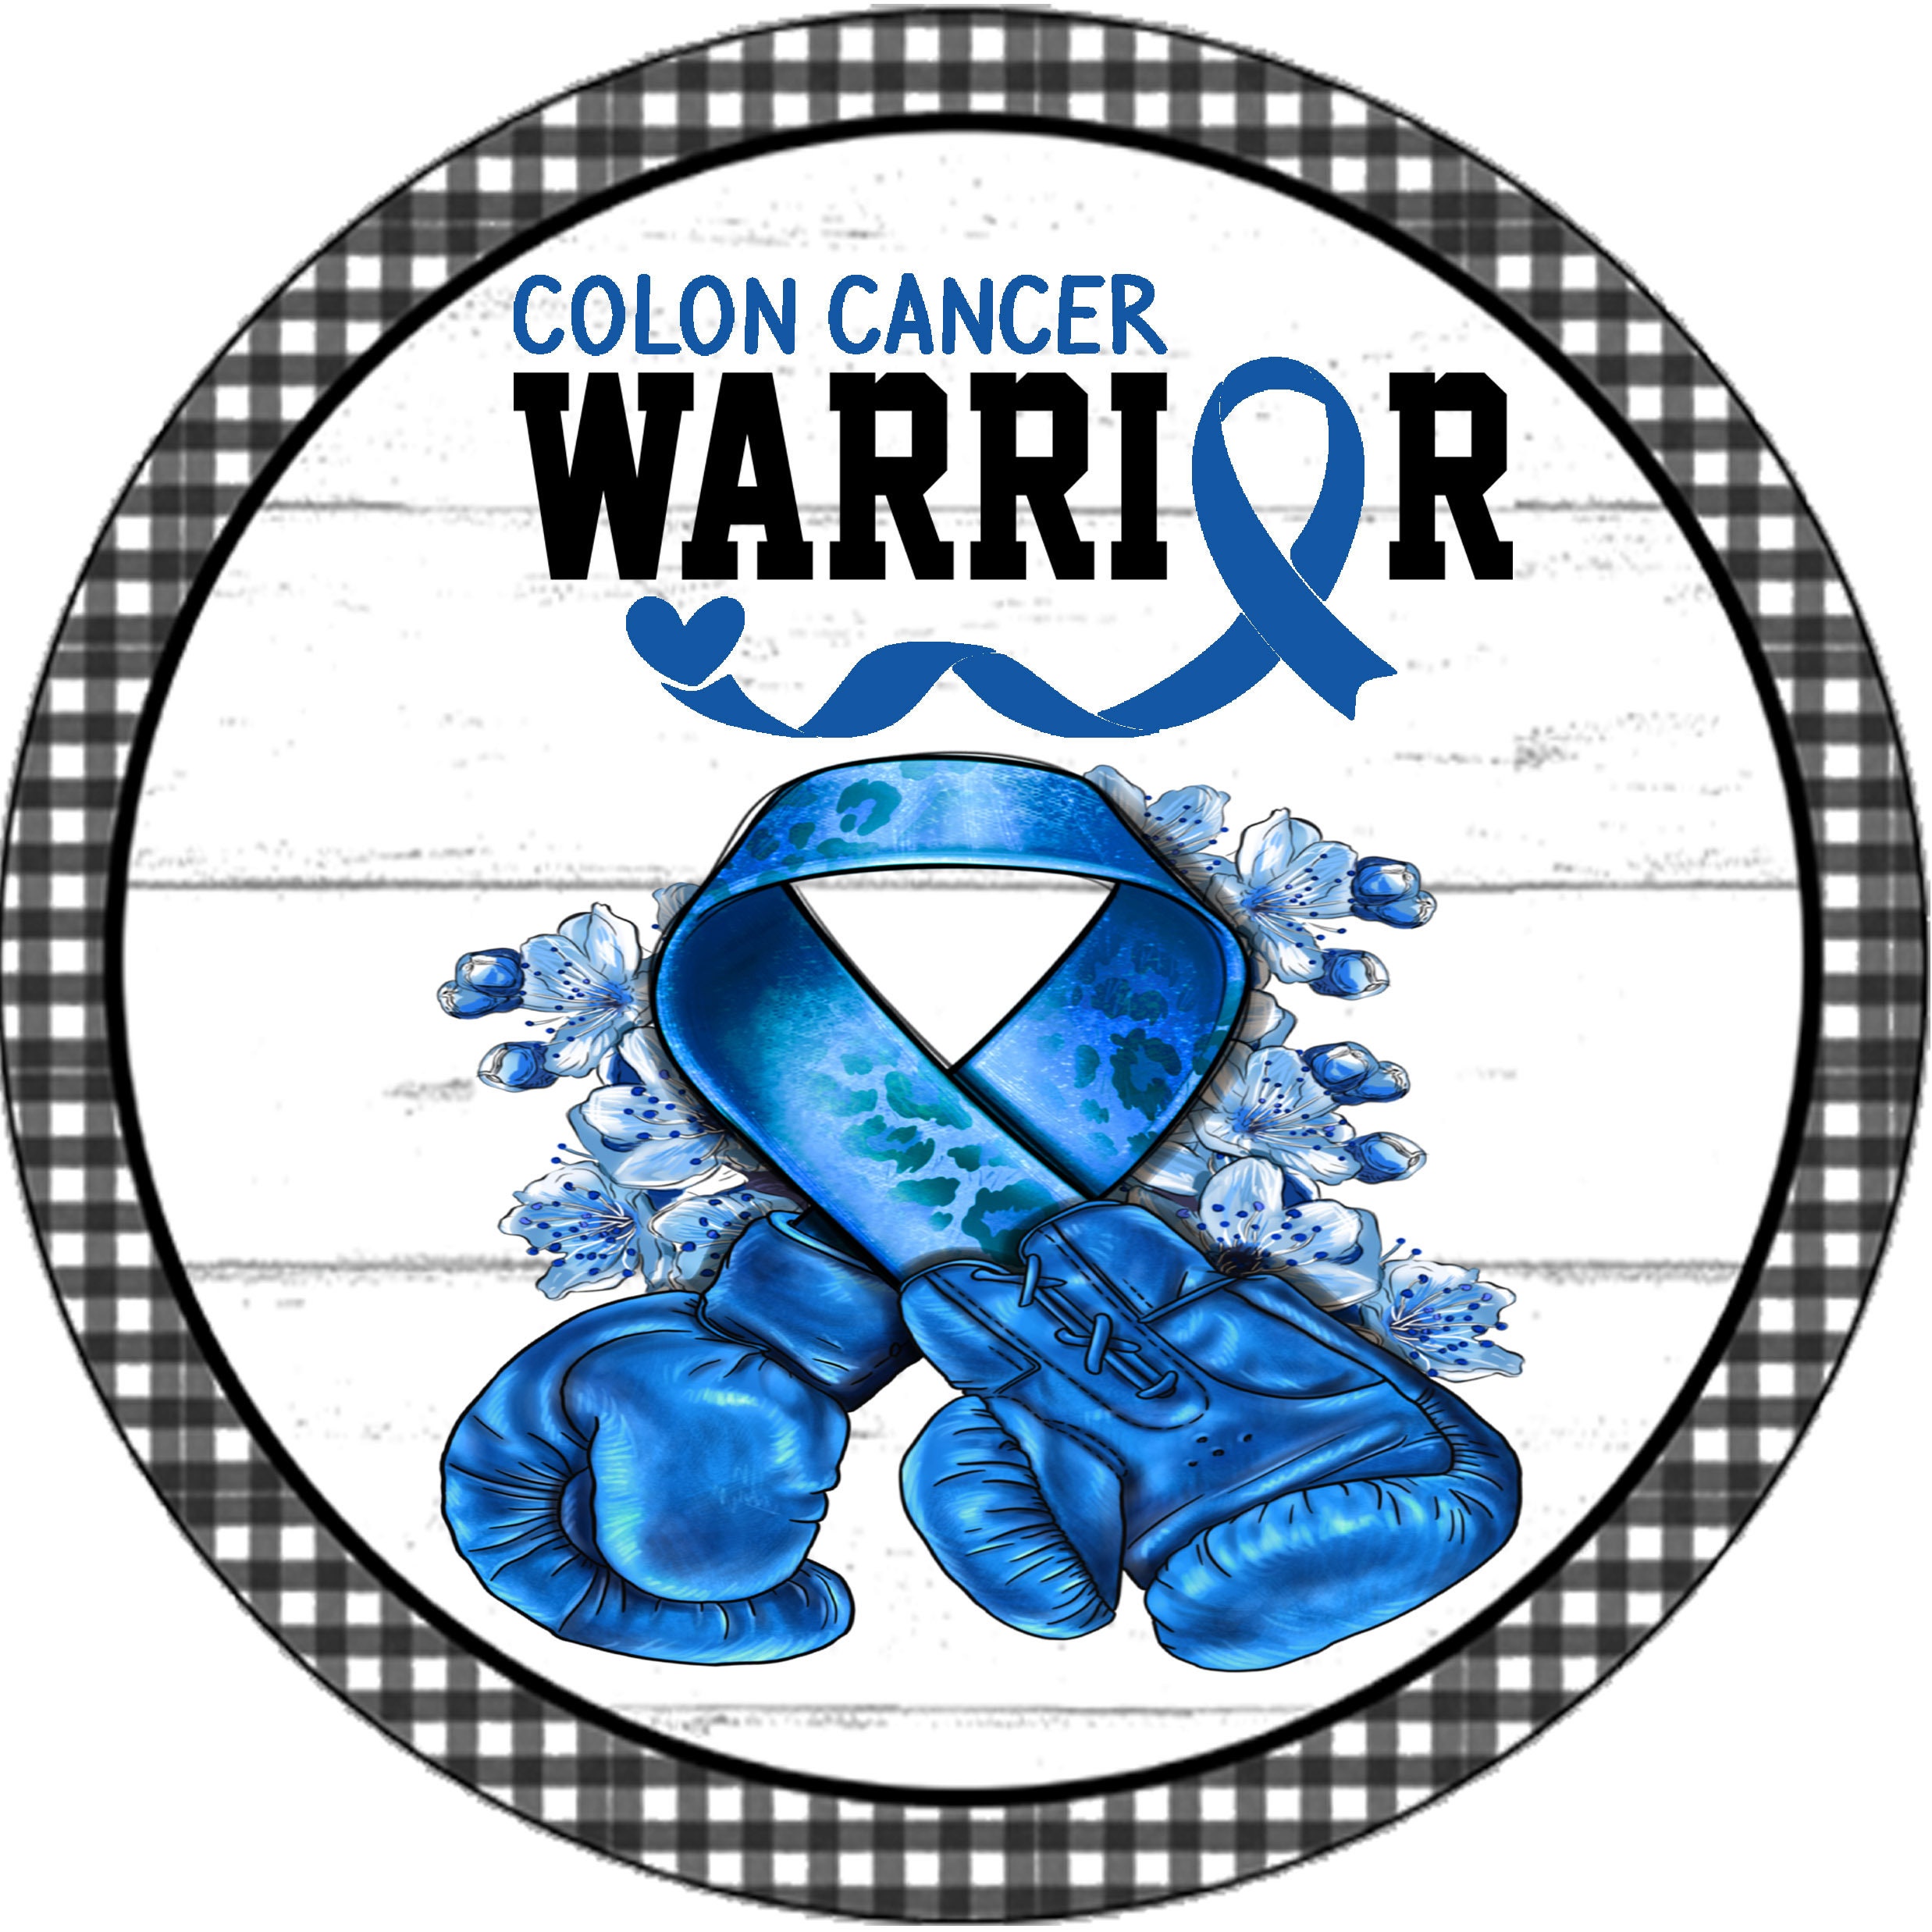 Dark Blue Ribbon for Colon Cancer Awareness Wall or Door Hanging